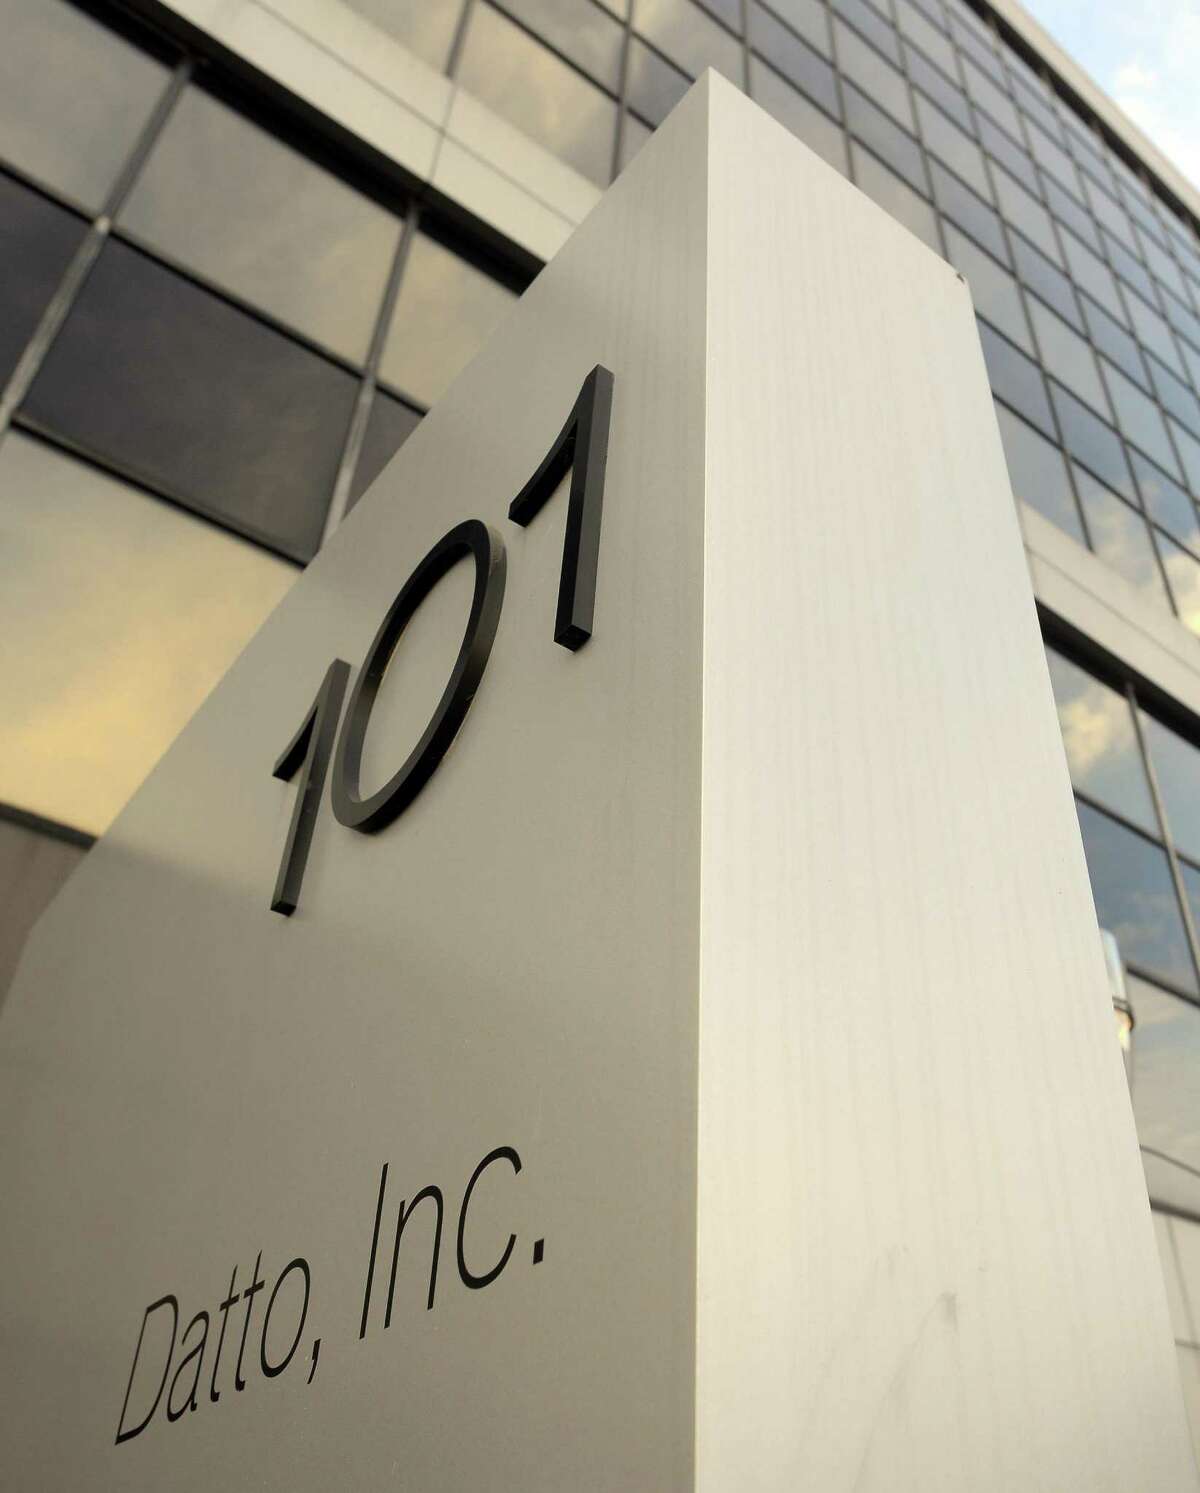 Datto headquarters at 101 Merritt 7 Corporate Park in Norwalk, Conn., where the data backup services firm has ranked among the fastest growing in the state the past several years.